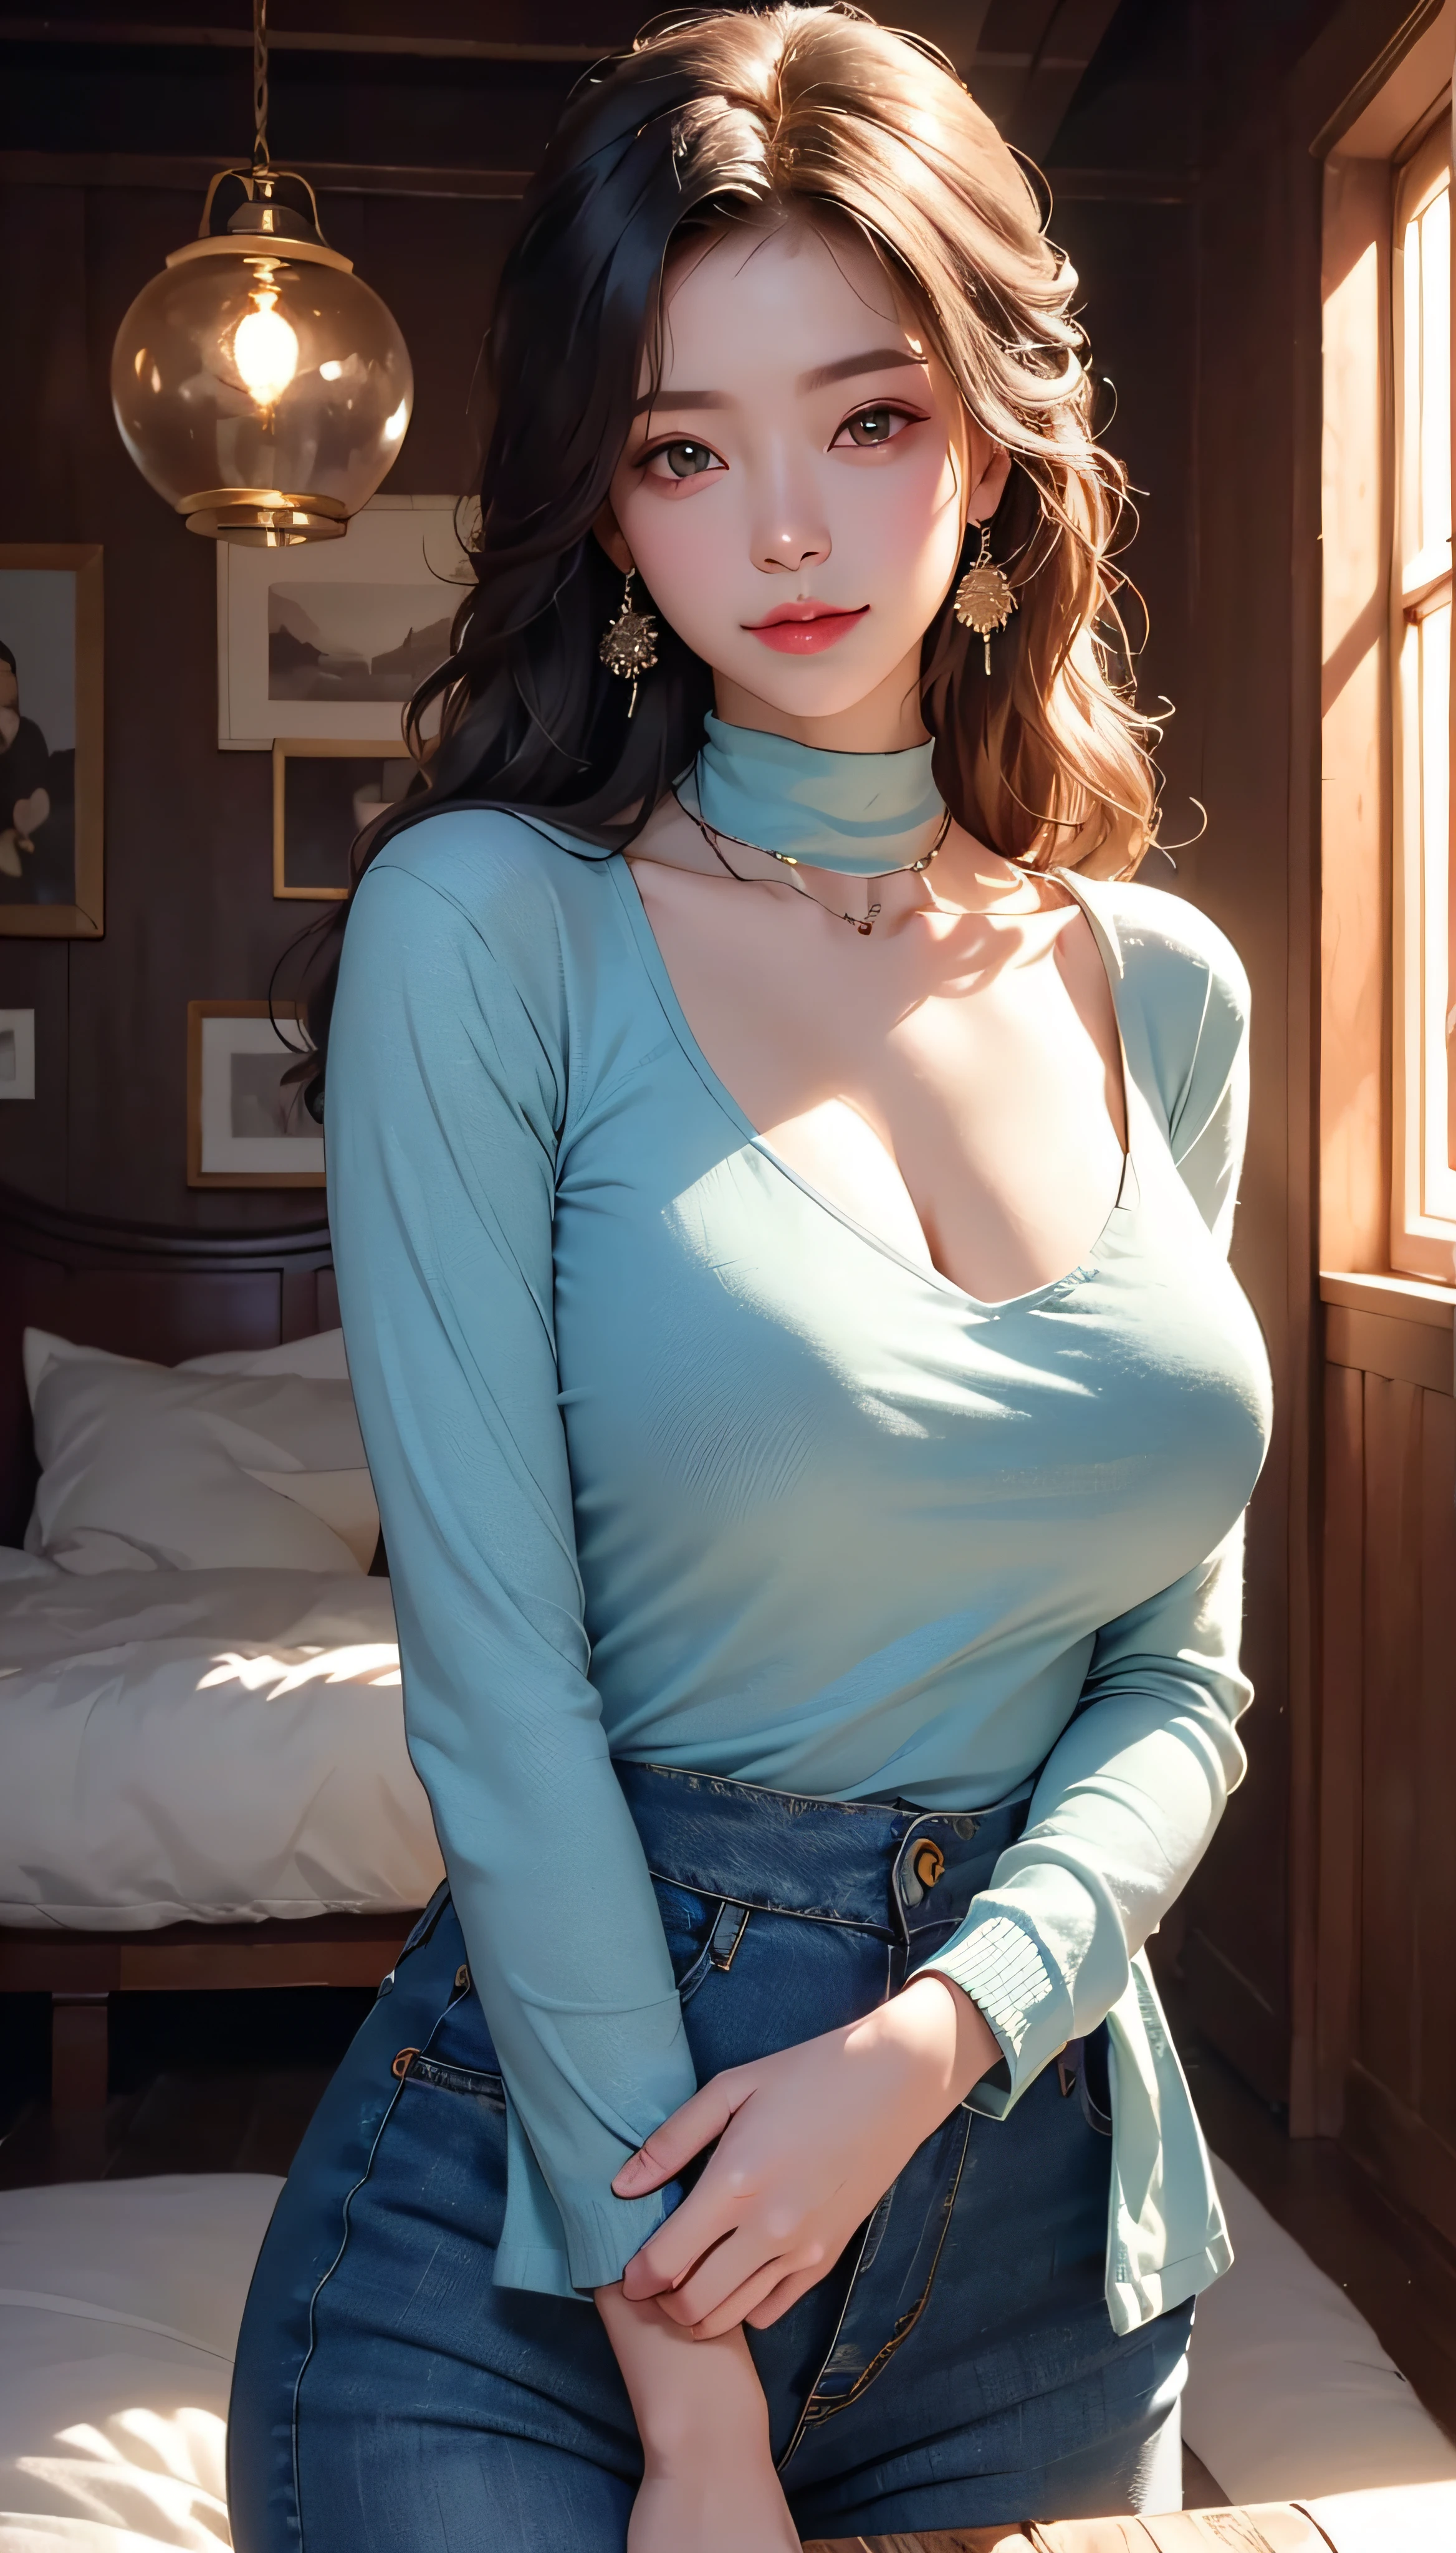 (1girll:1.3)、solo、__Body parts__、offcial art、Unity 8k wallpaper、ultra - detailed、Beauty and aesthetics、big breasts beautiful、tmasterpiece、best qualtiy、Fantastical Atmosphere、calm color palette、tranquil mood、soft shade、house wife，Light sweater，high waisted jeans，Smart hairstyle，cinmatic lighting，Necklace earrings、looking to the camera，Light smile，Huge chest：1.3